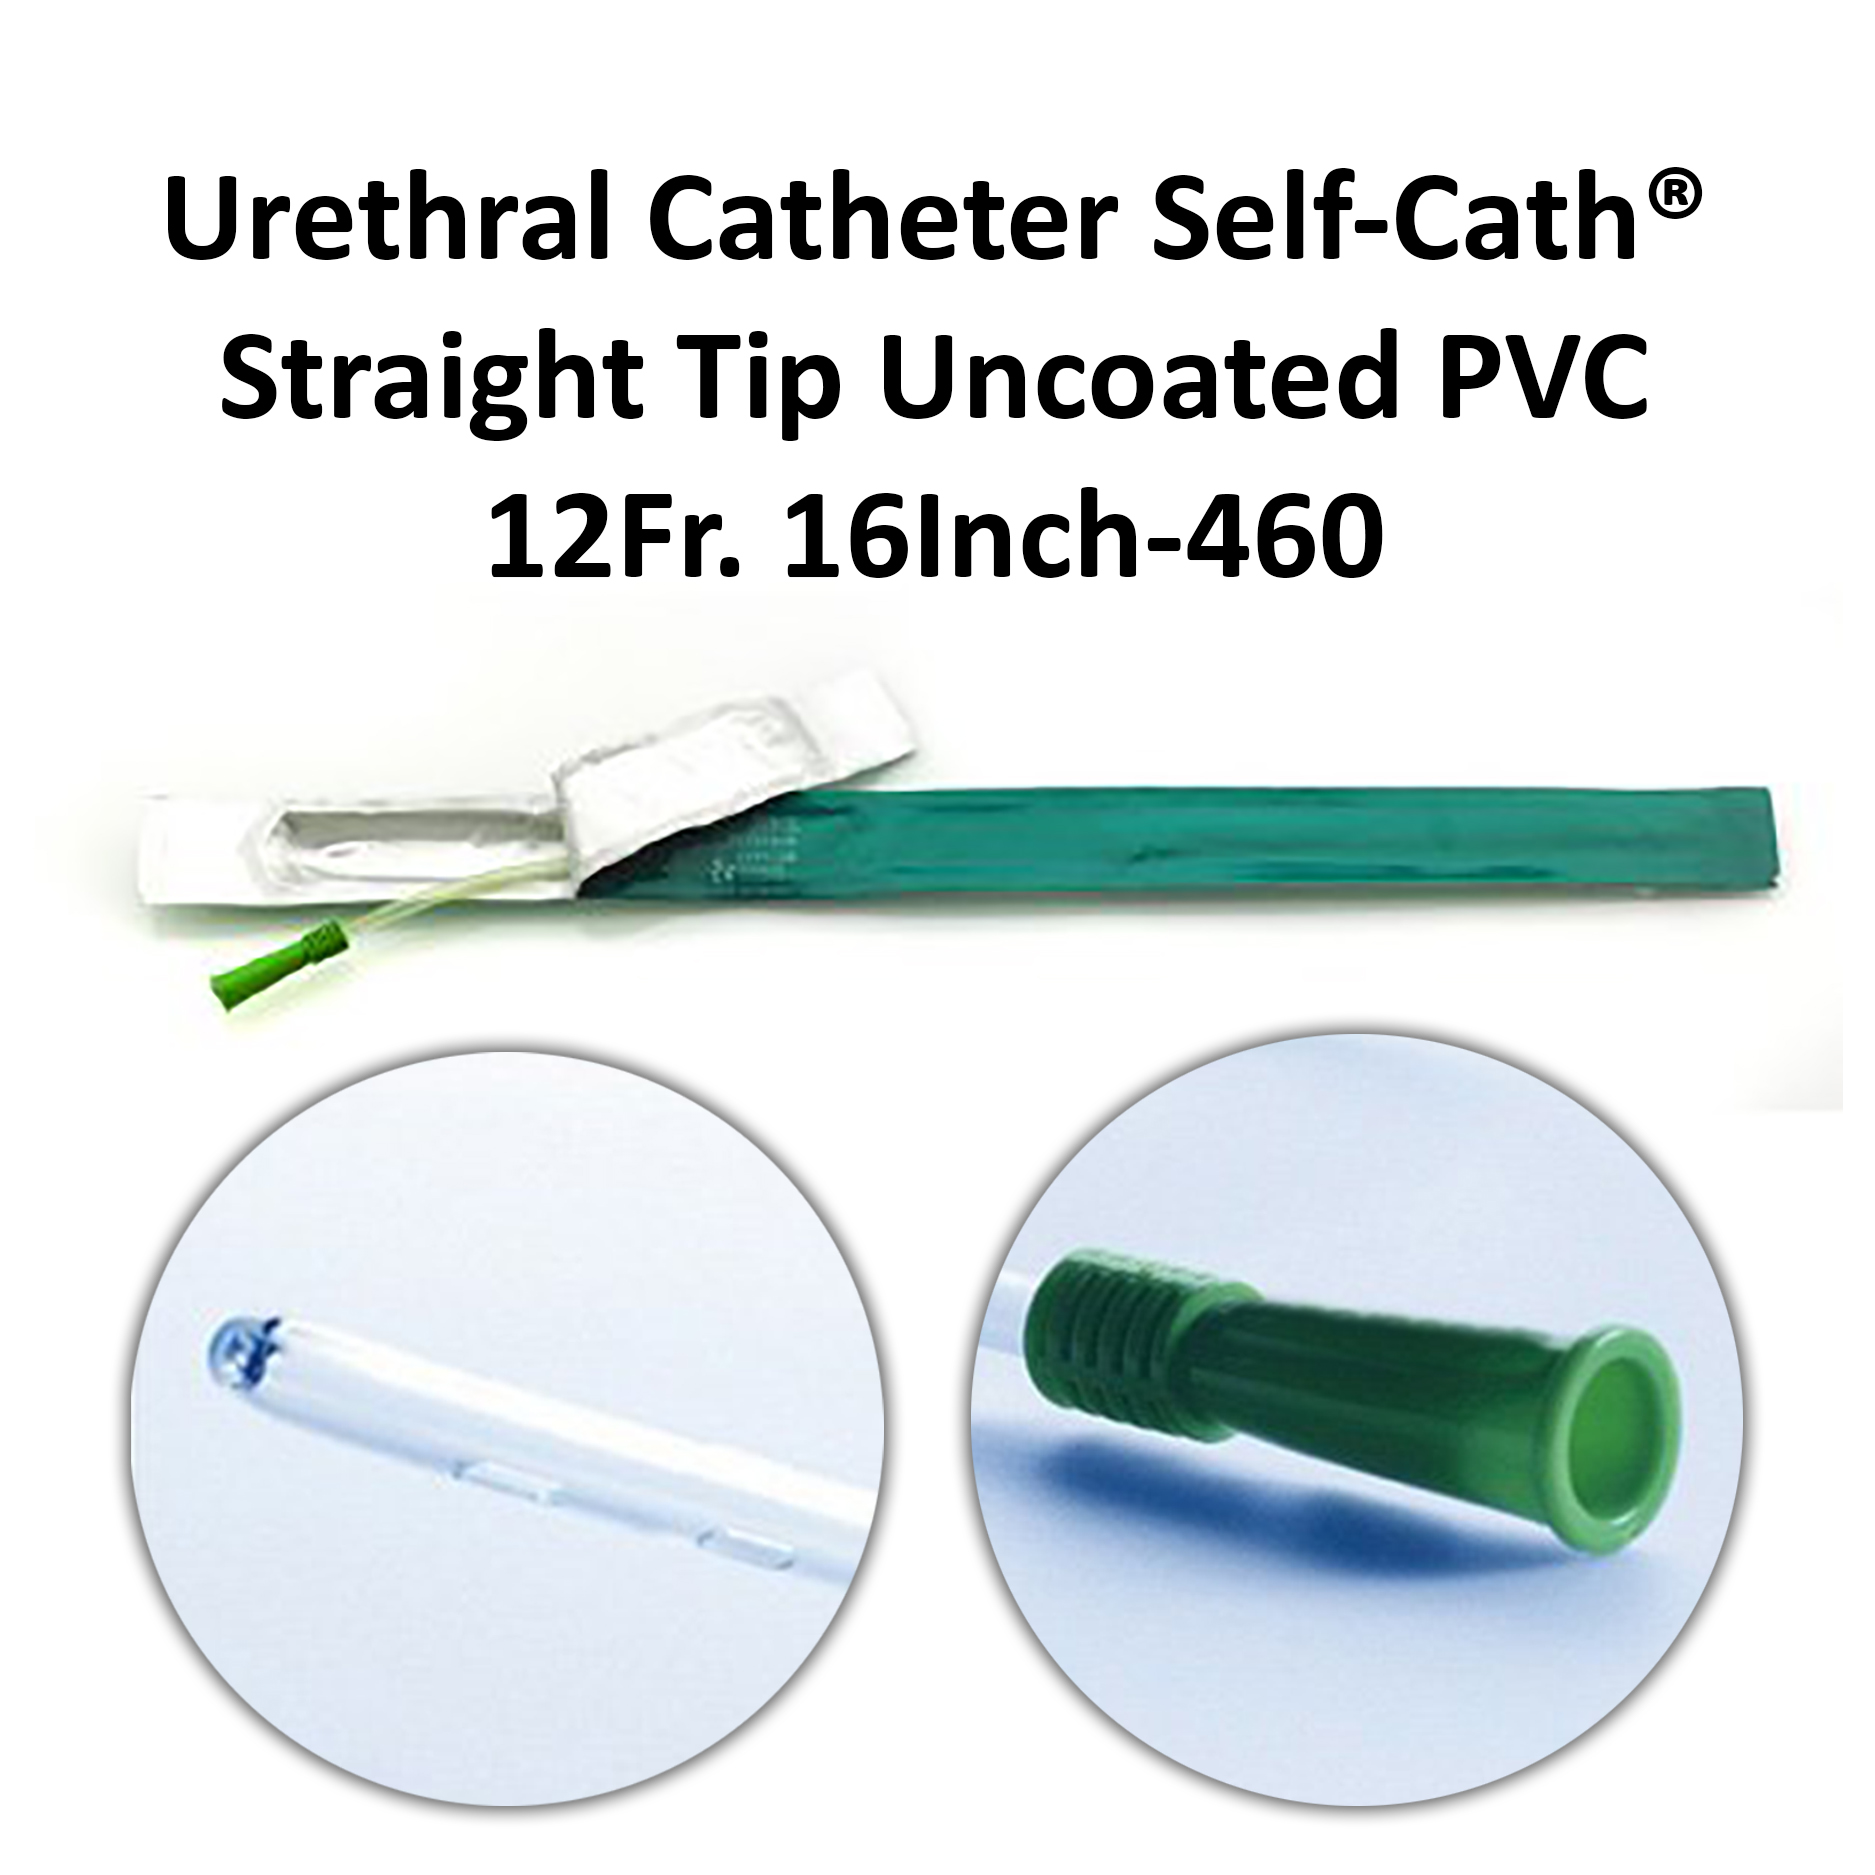 urethral-catheter-self-cath-straight-tip-uncoated-pvc-12-fr-16-inch-460